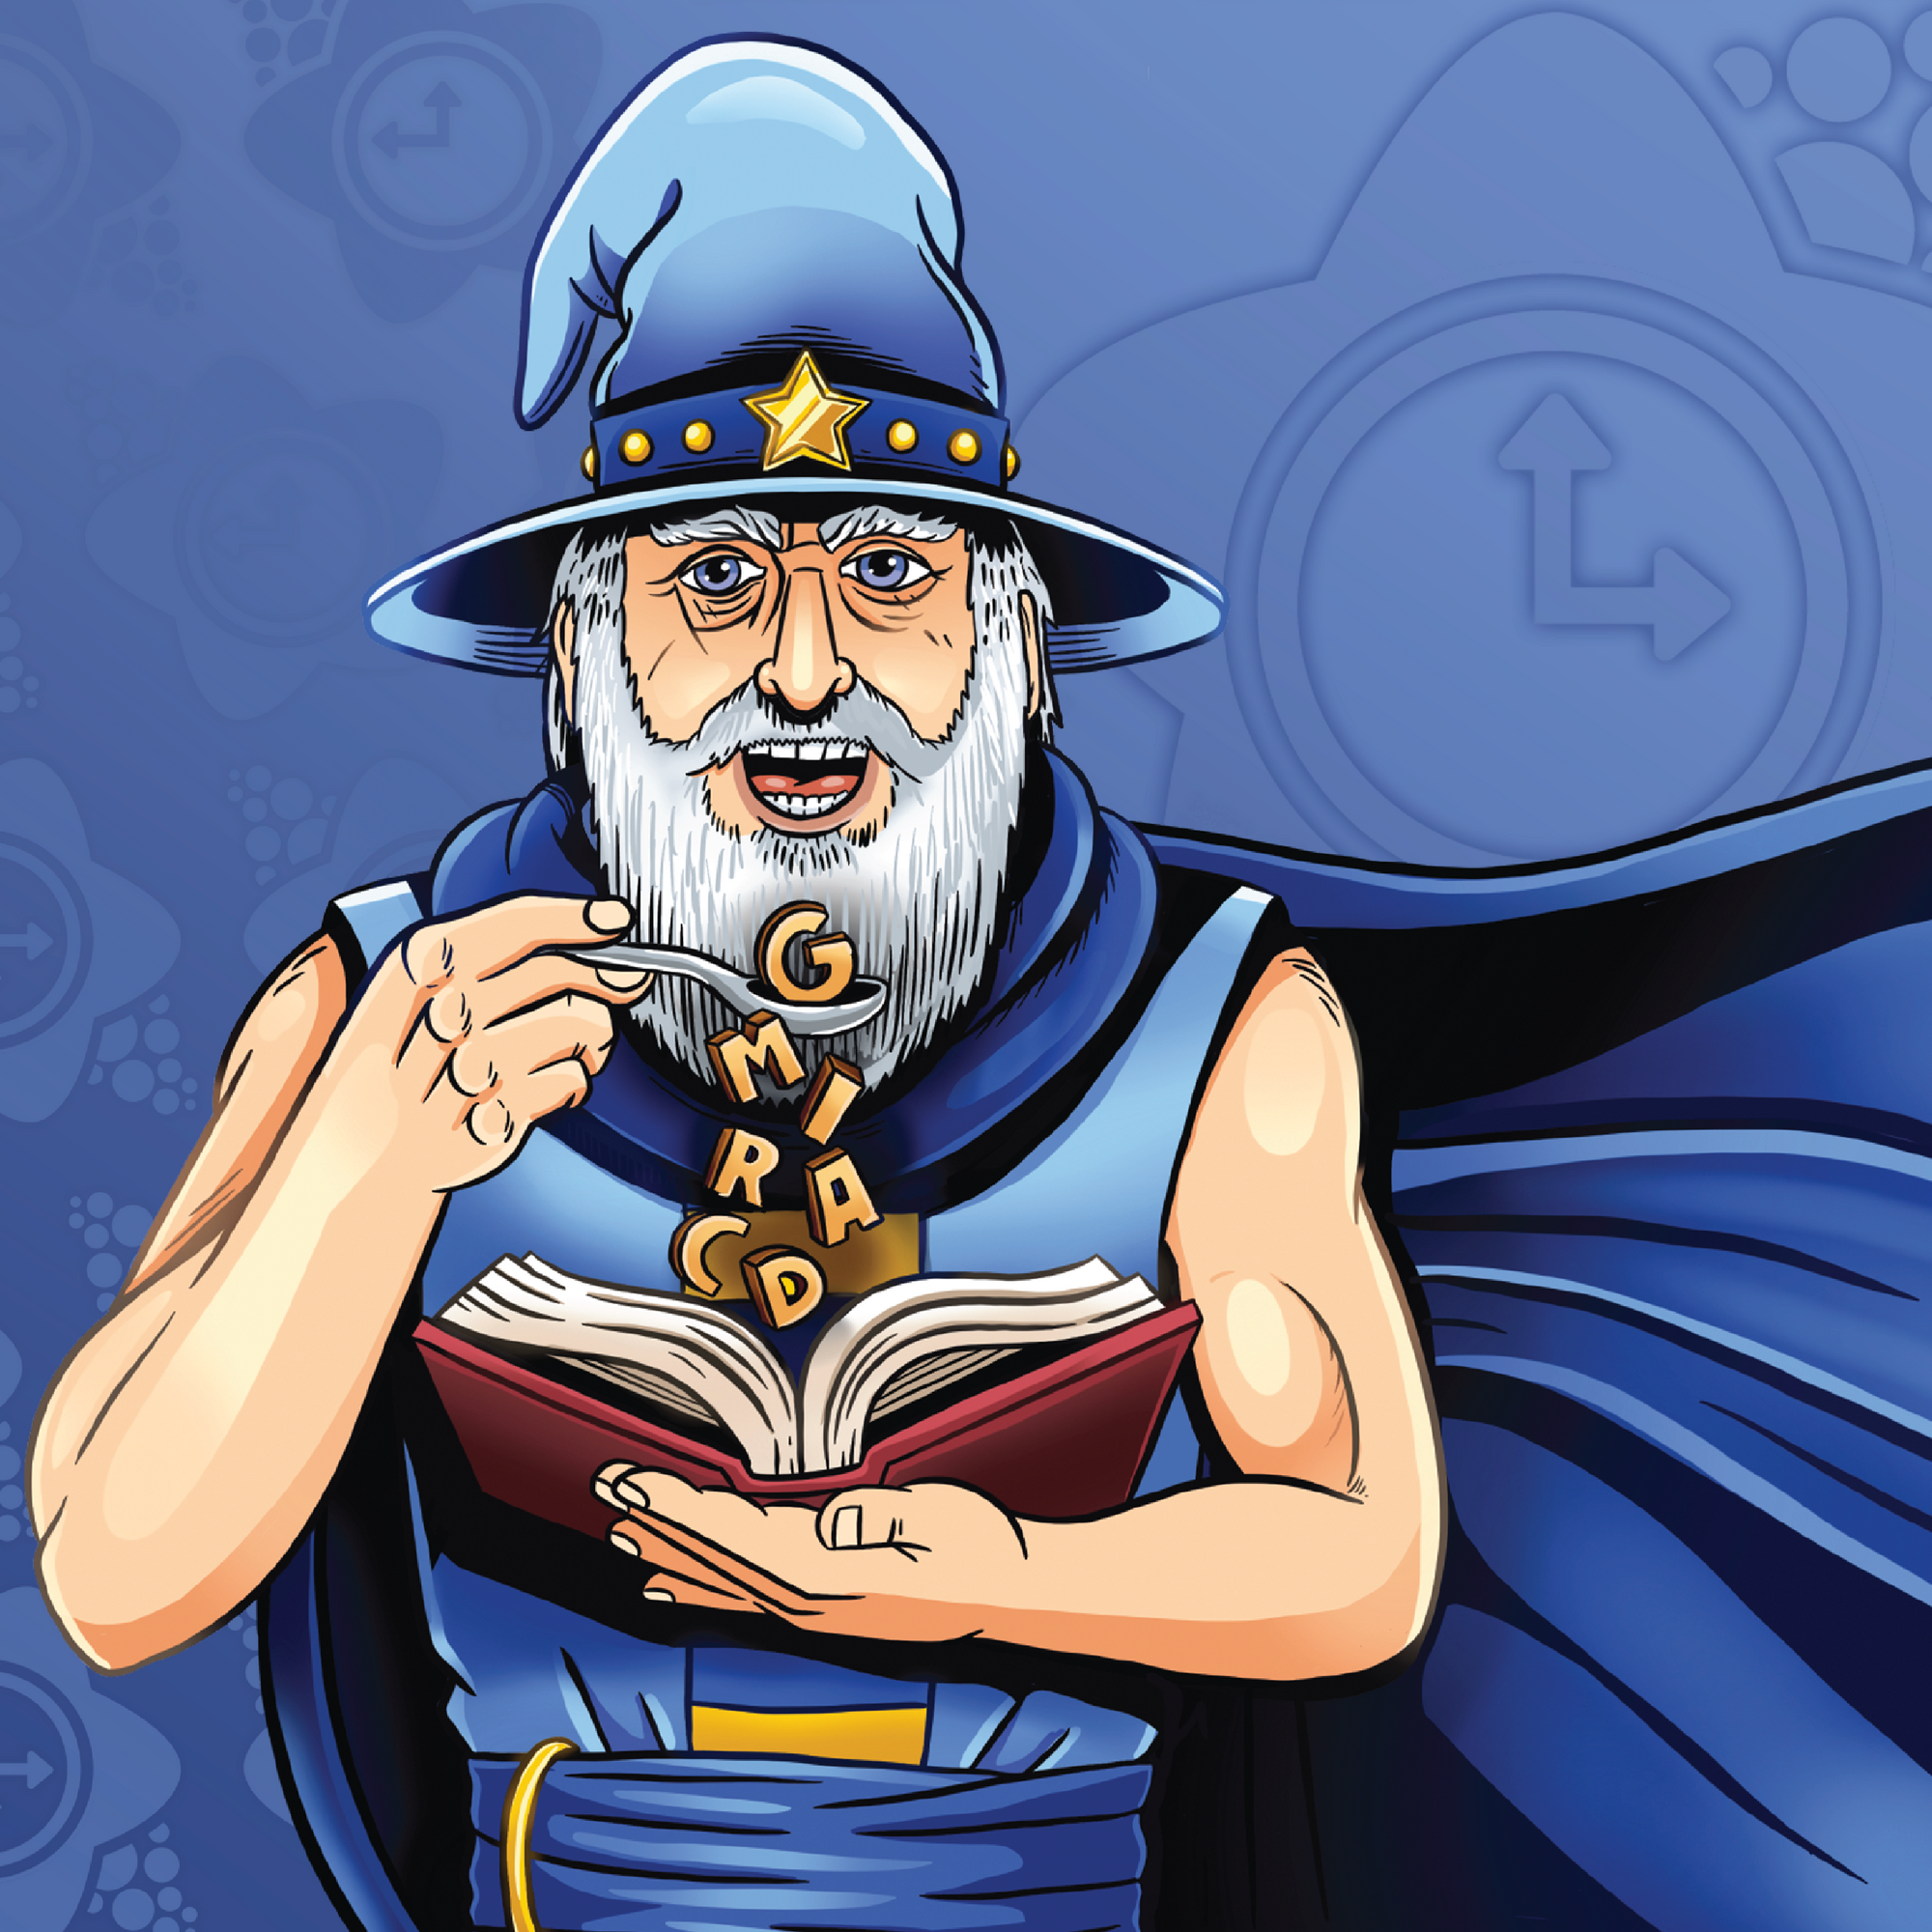 Comic style drawing of legendary wizard, Merlin, action figure with a sky blue cape, holding a book and flame.